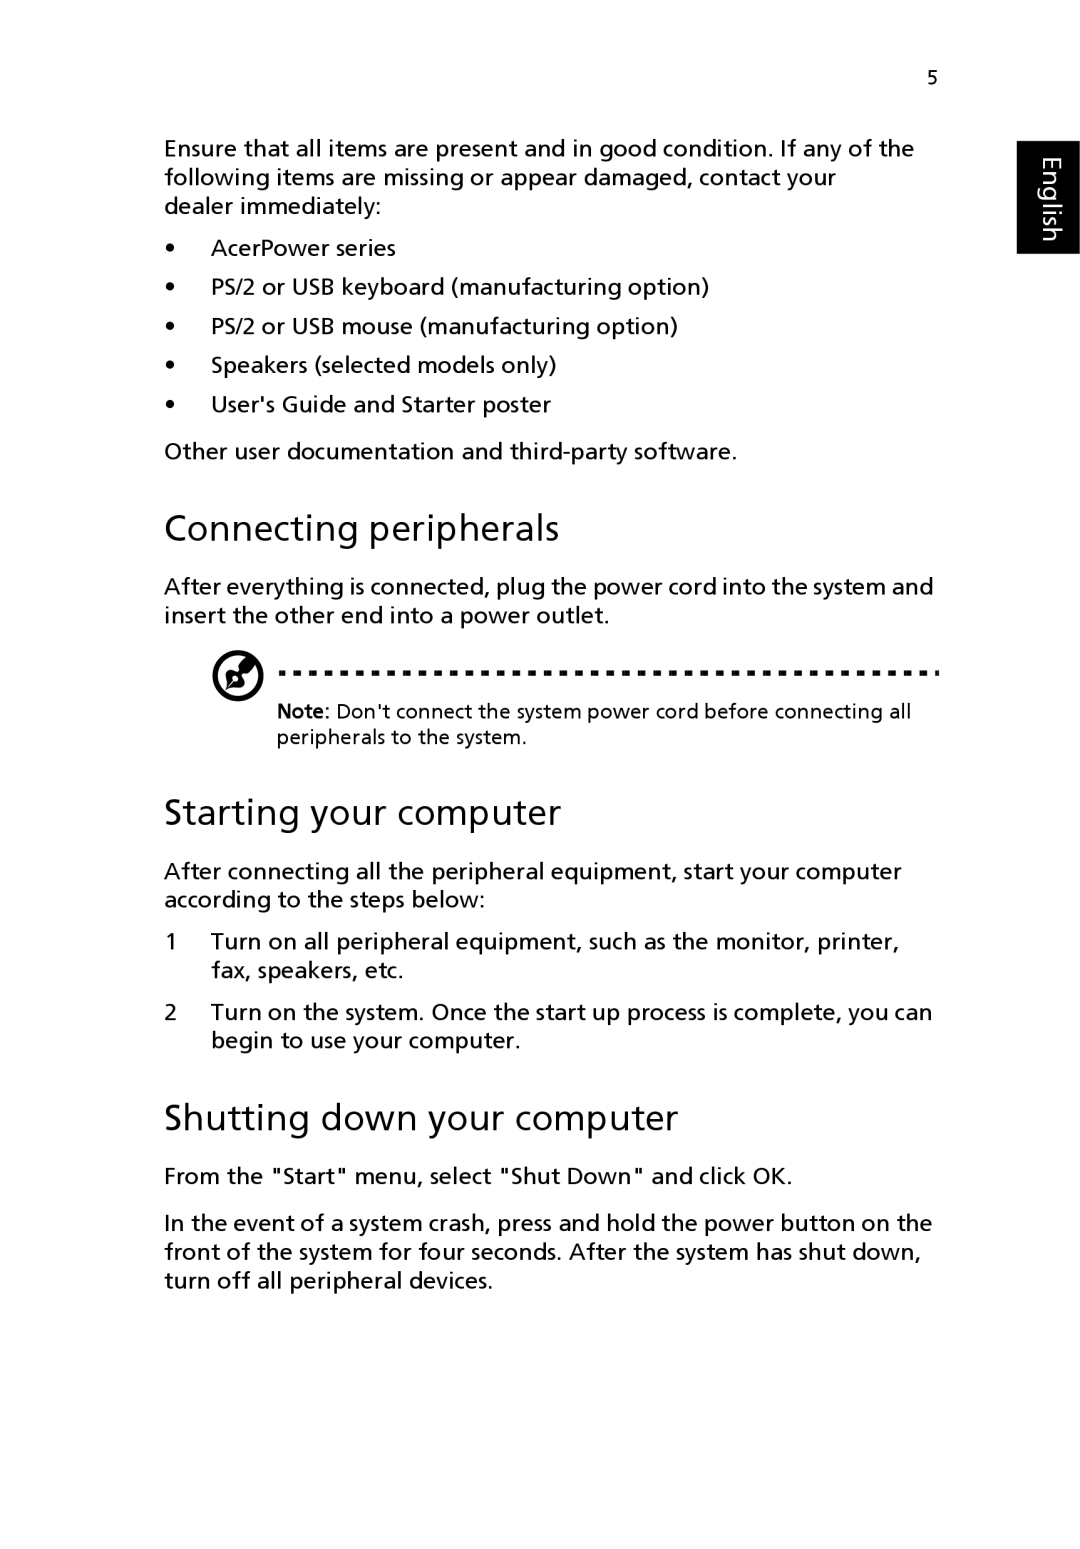 Acer POWER SERIES manual Connecting peripherals, Starting your computer, Shutting down your computer, English 